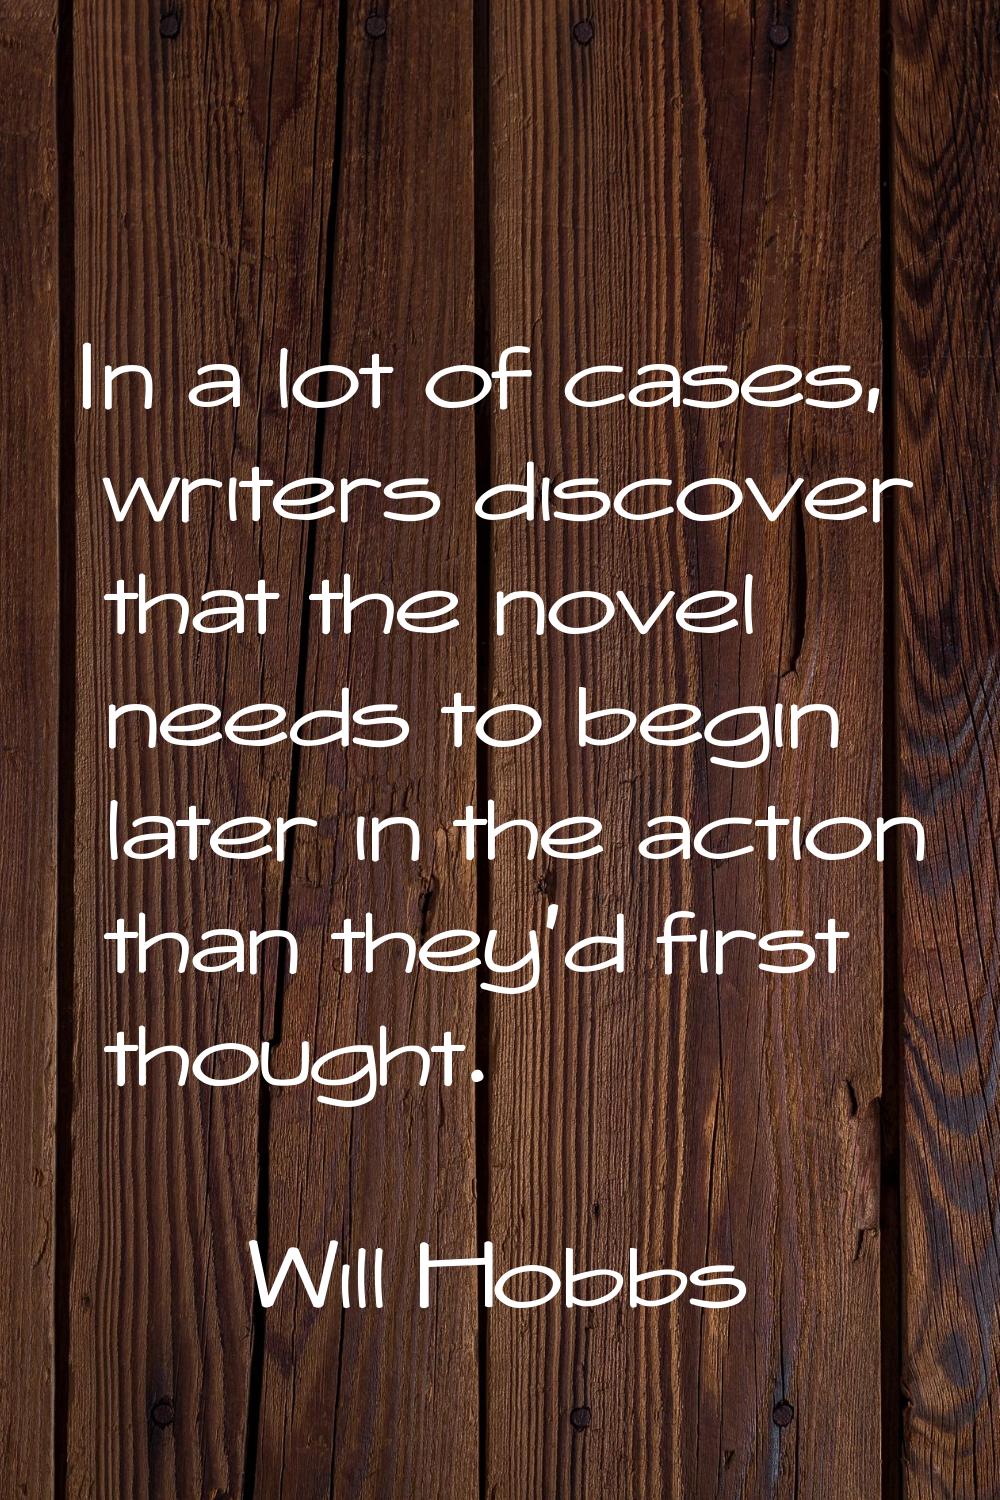 In a lot of cases, writers discover that the novel needs to begin later in the action than they'd f